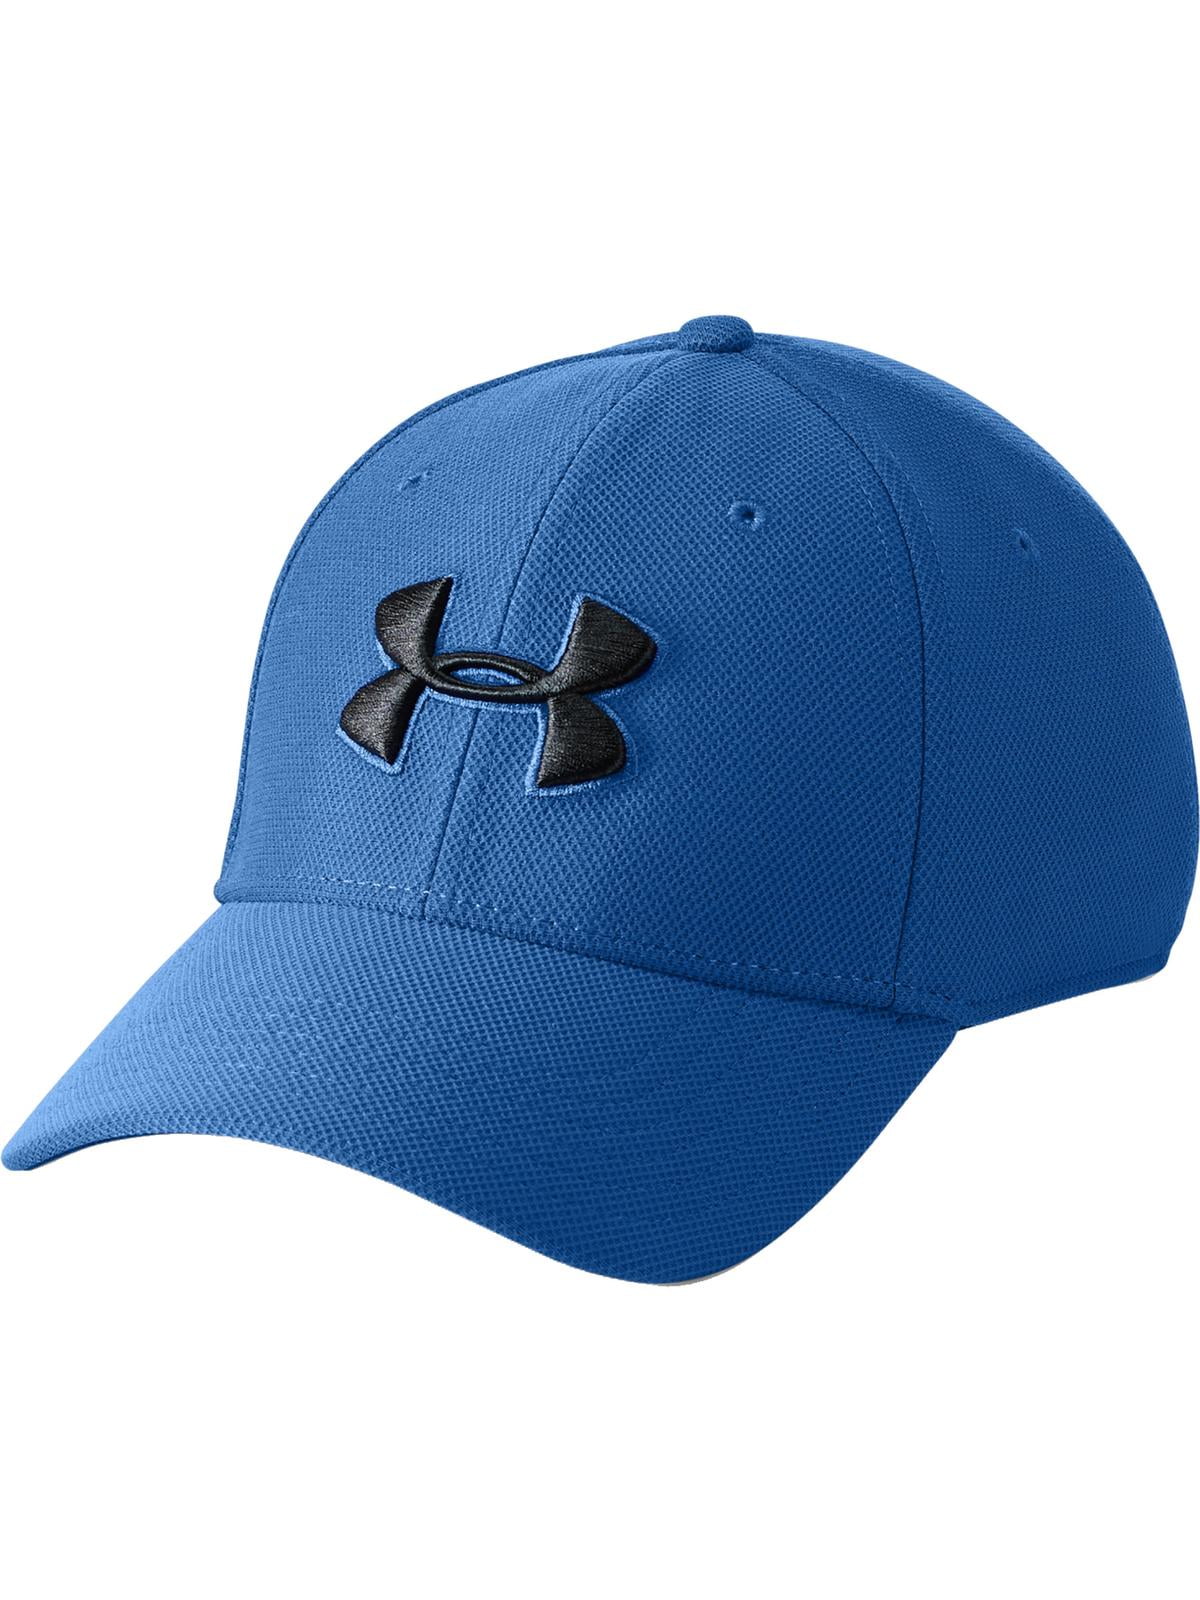 Under Armour Mens Blitzing 3.0 Fitted Sports Hat 